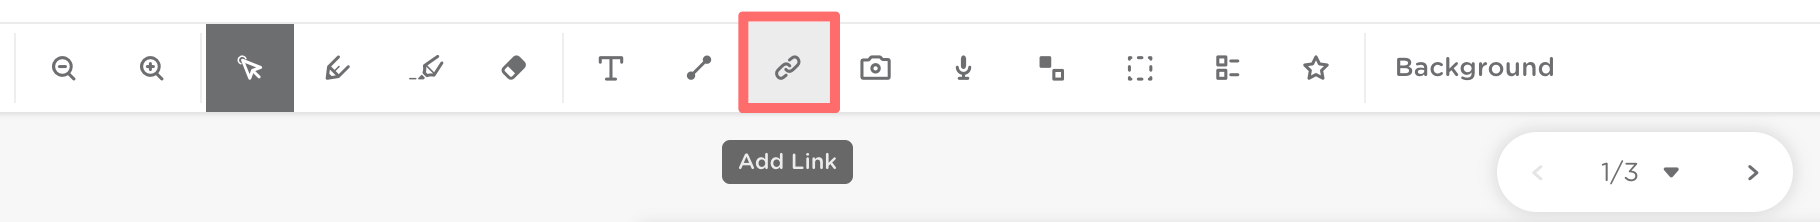 The tool bar on a slide. The add link icon is outlined in red.